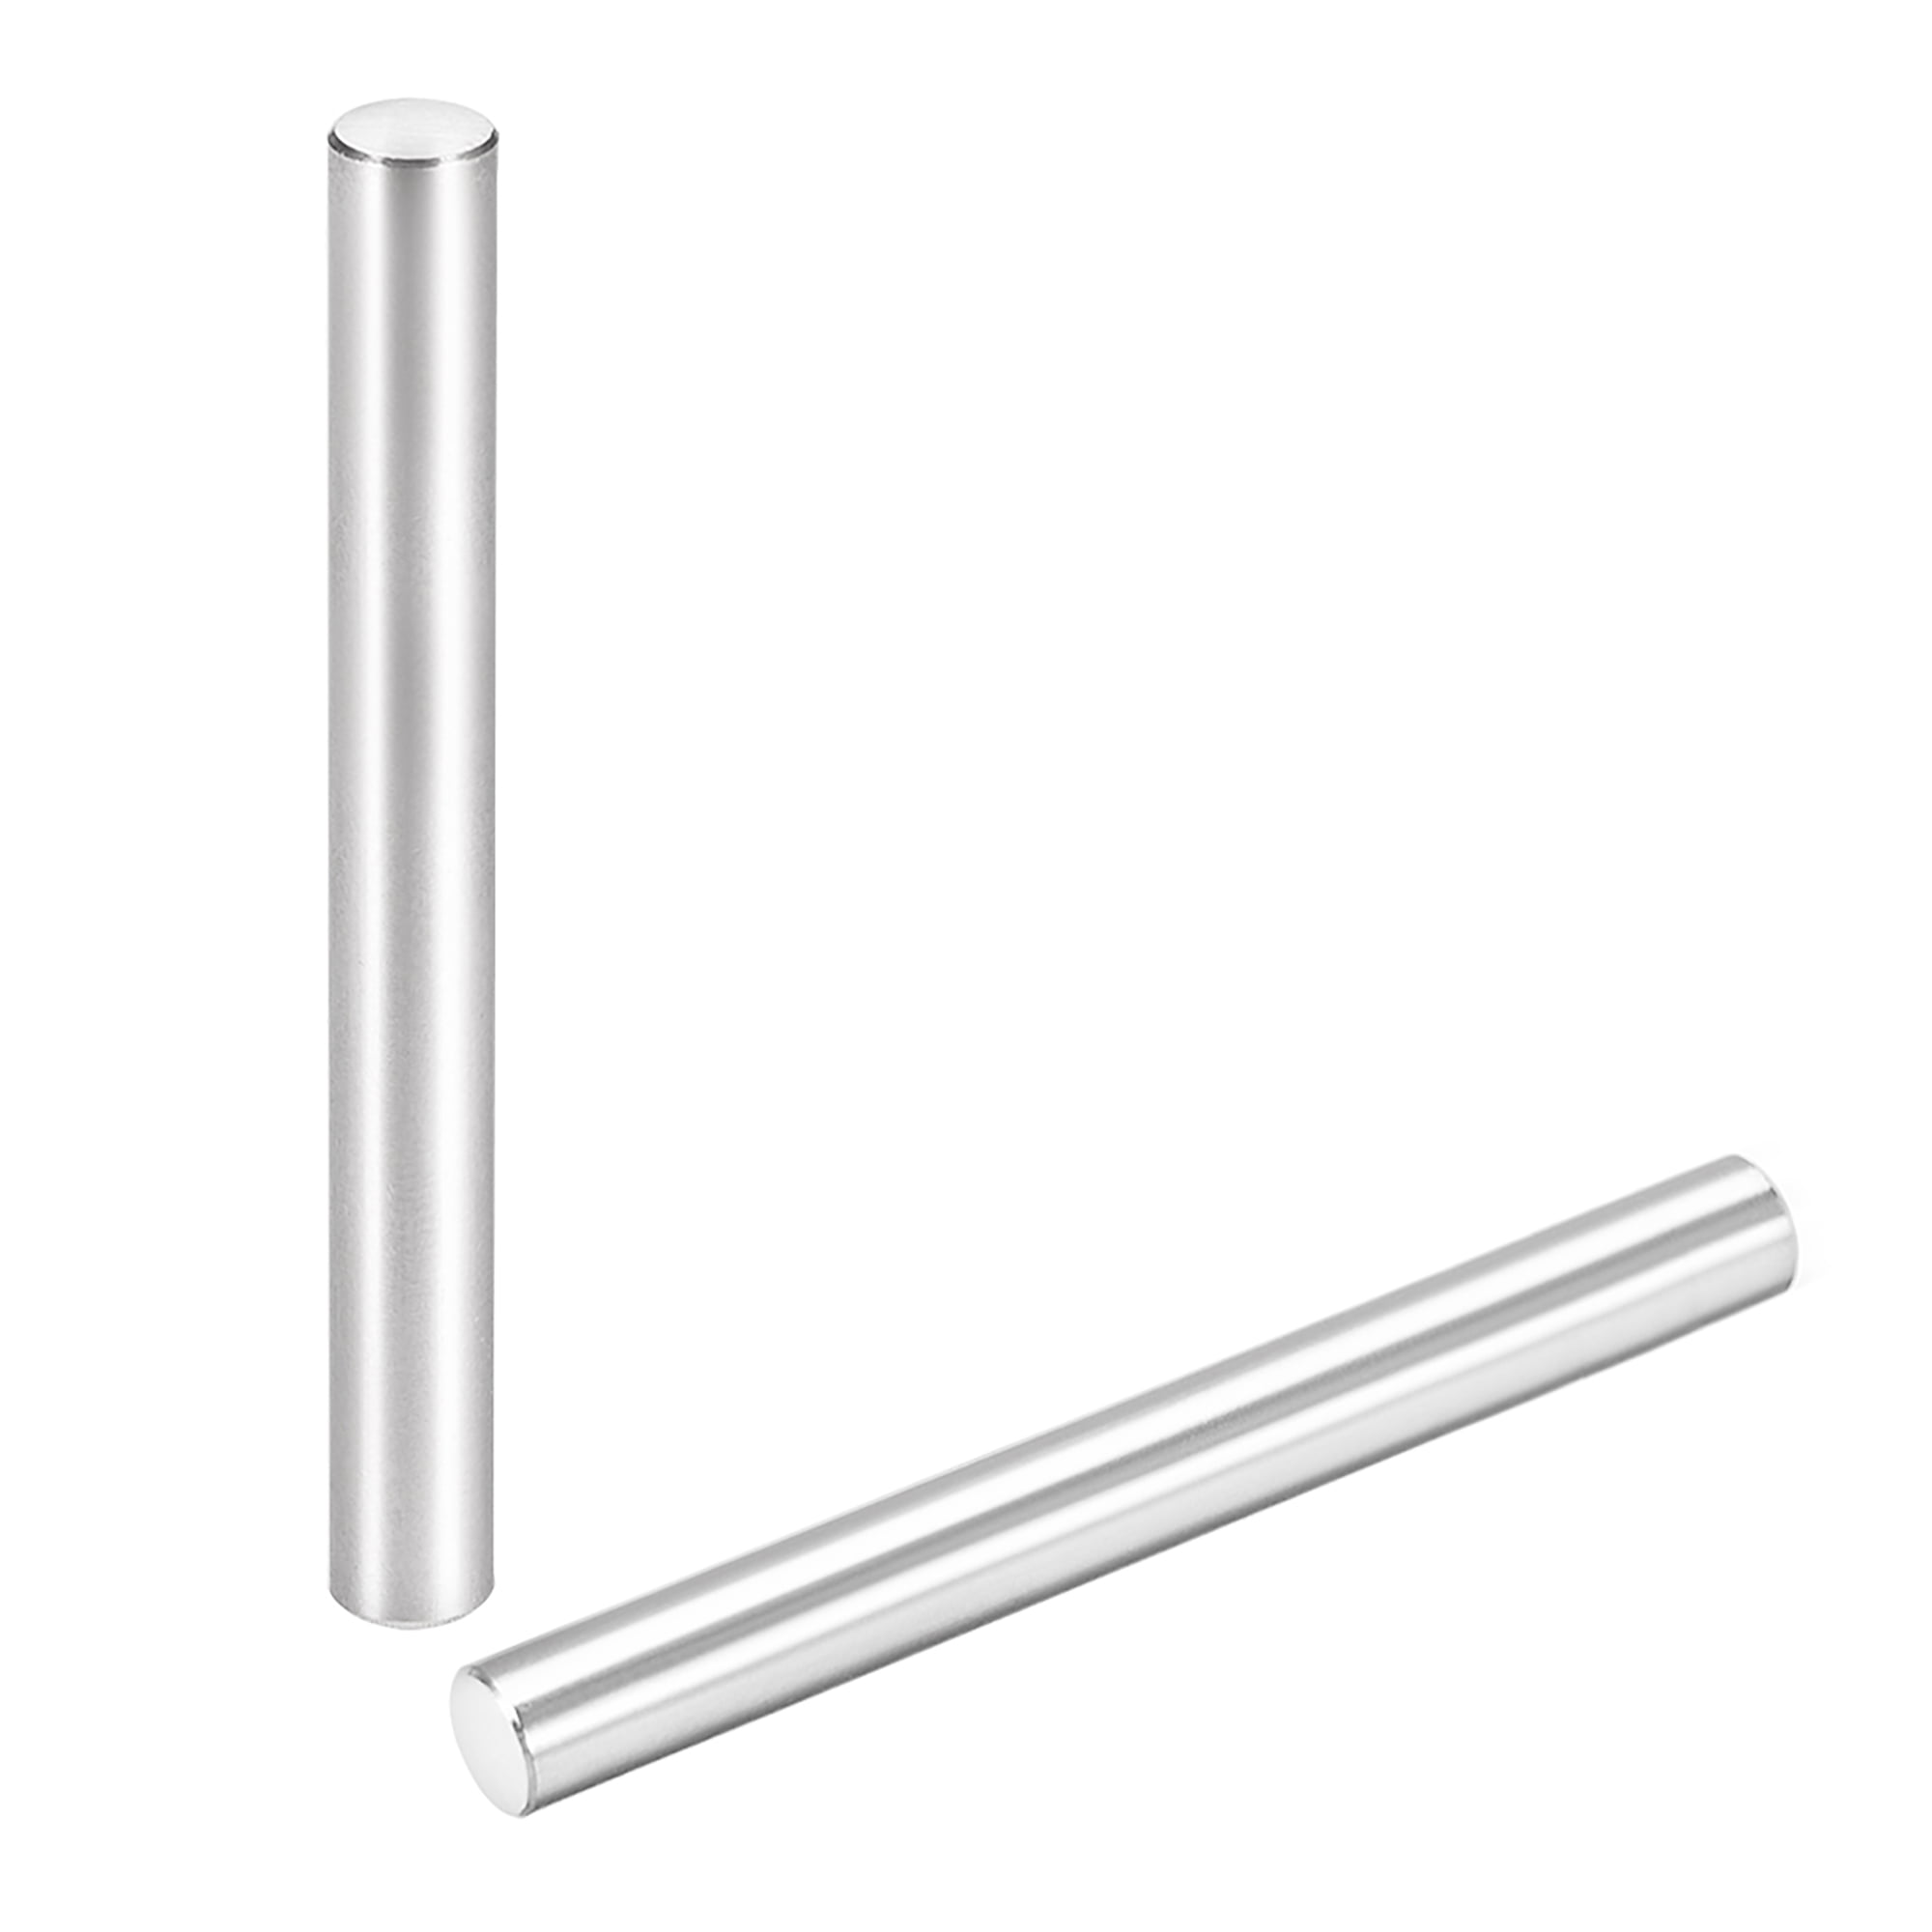 15 Pcs 6mm X 60mm Dowel Pin 304 Stainless Steel Cylindrical Shelf ...